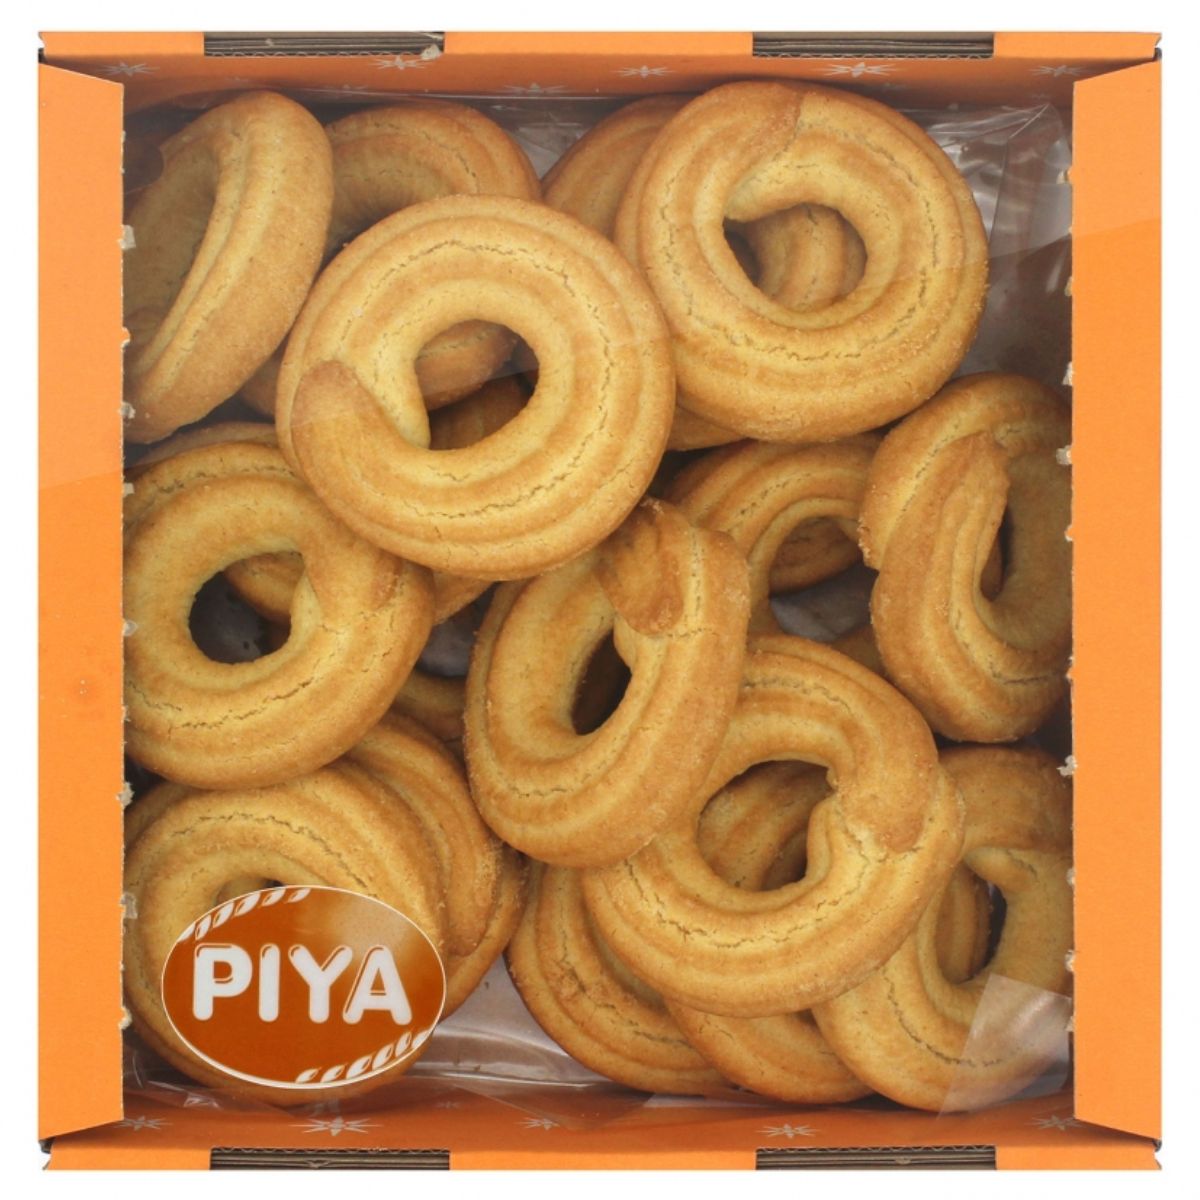 Piya cookies with butter in a box on a white background.